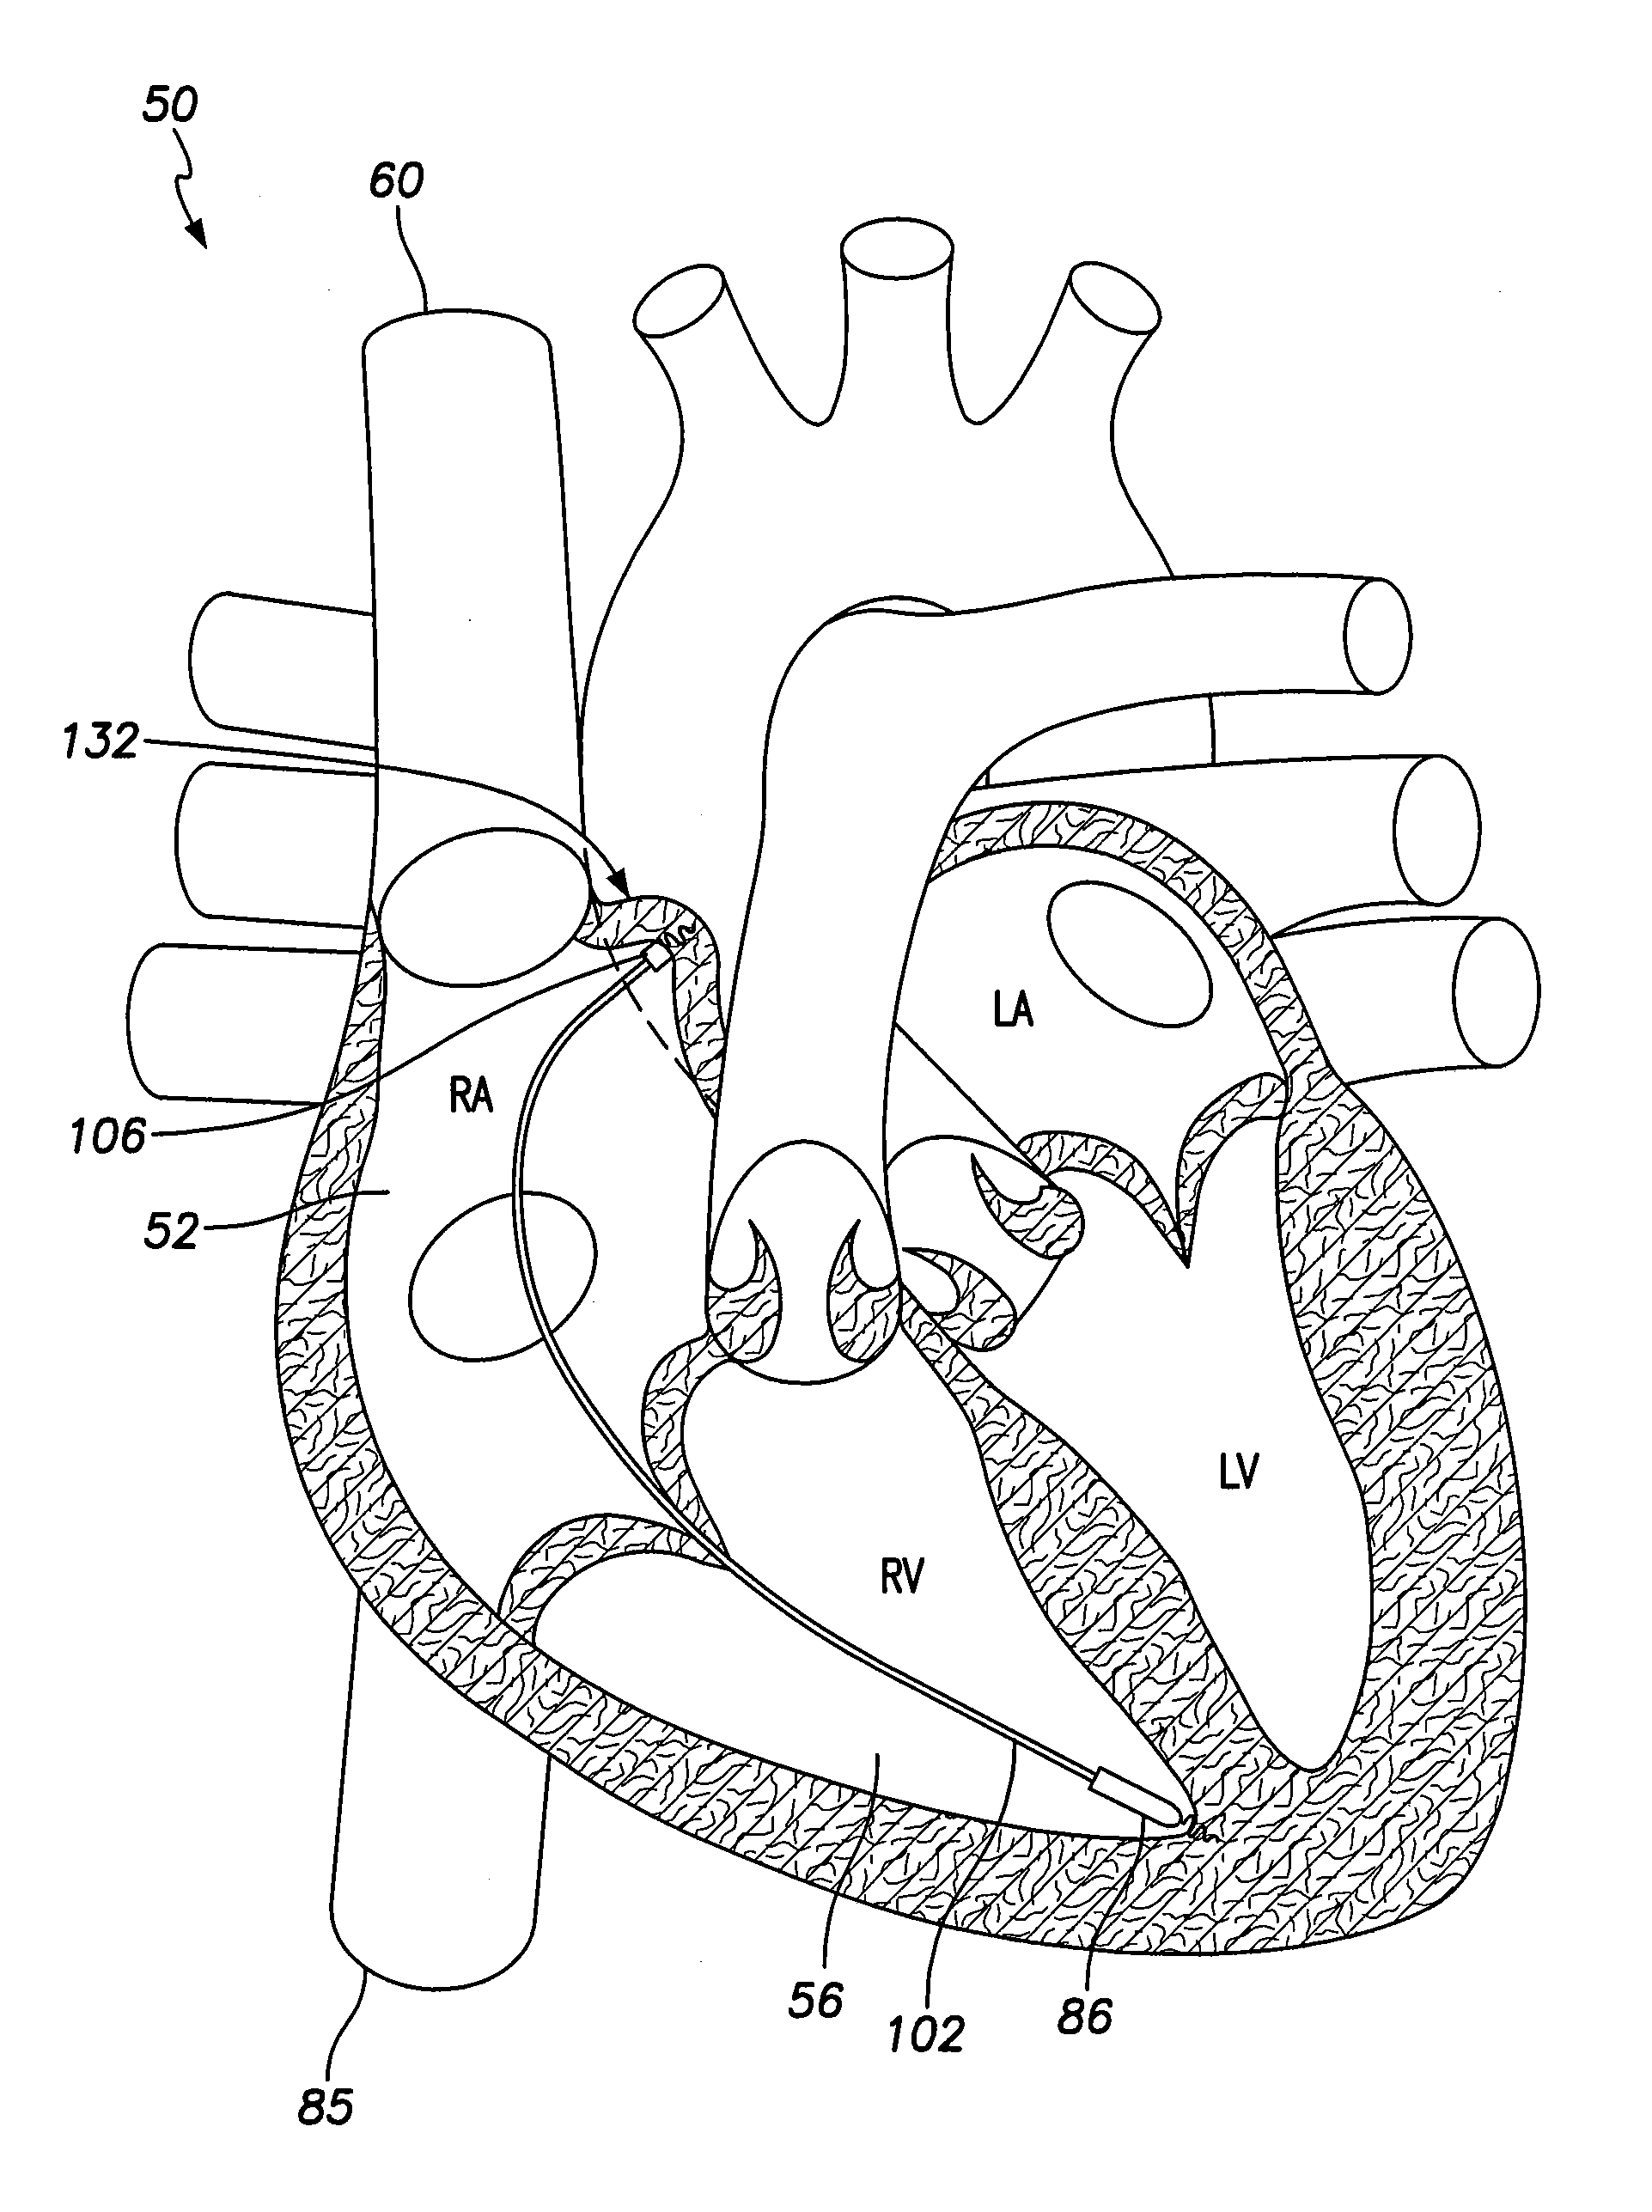 Unitary dual-chamber leadless intra-cardiac medical device and method of implanting same